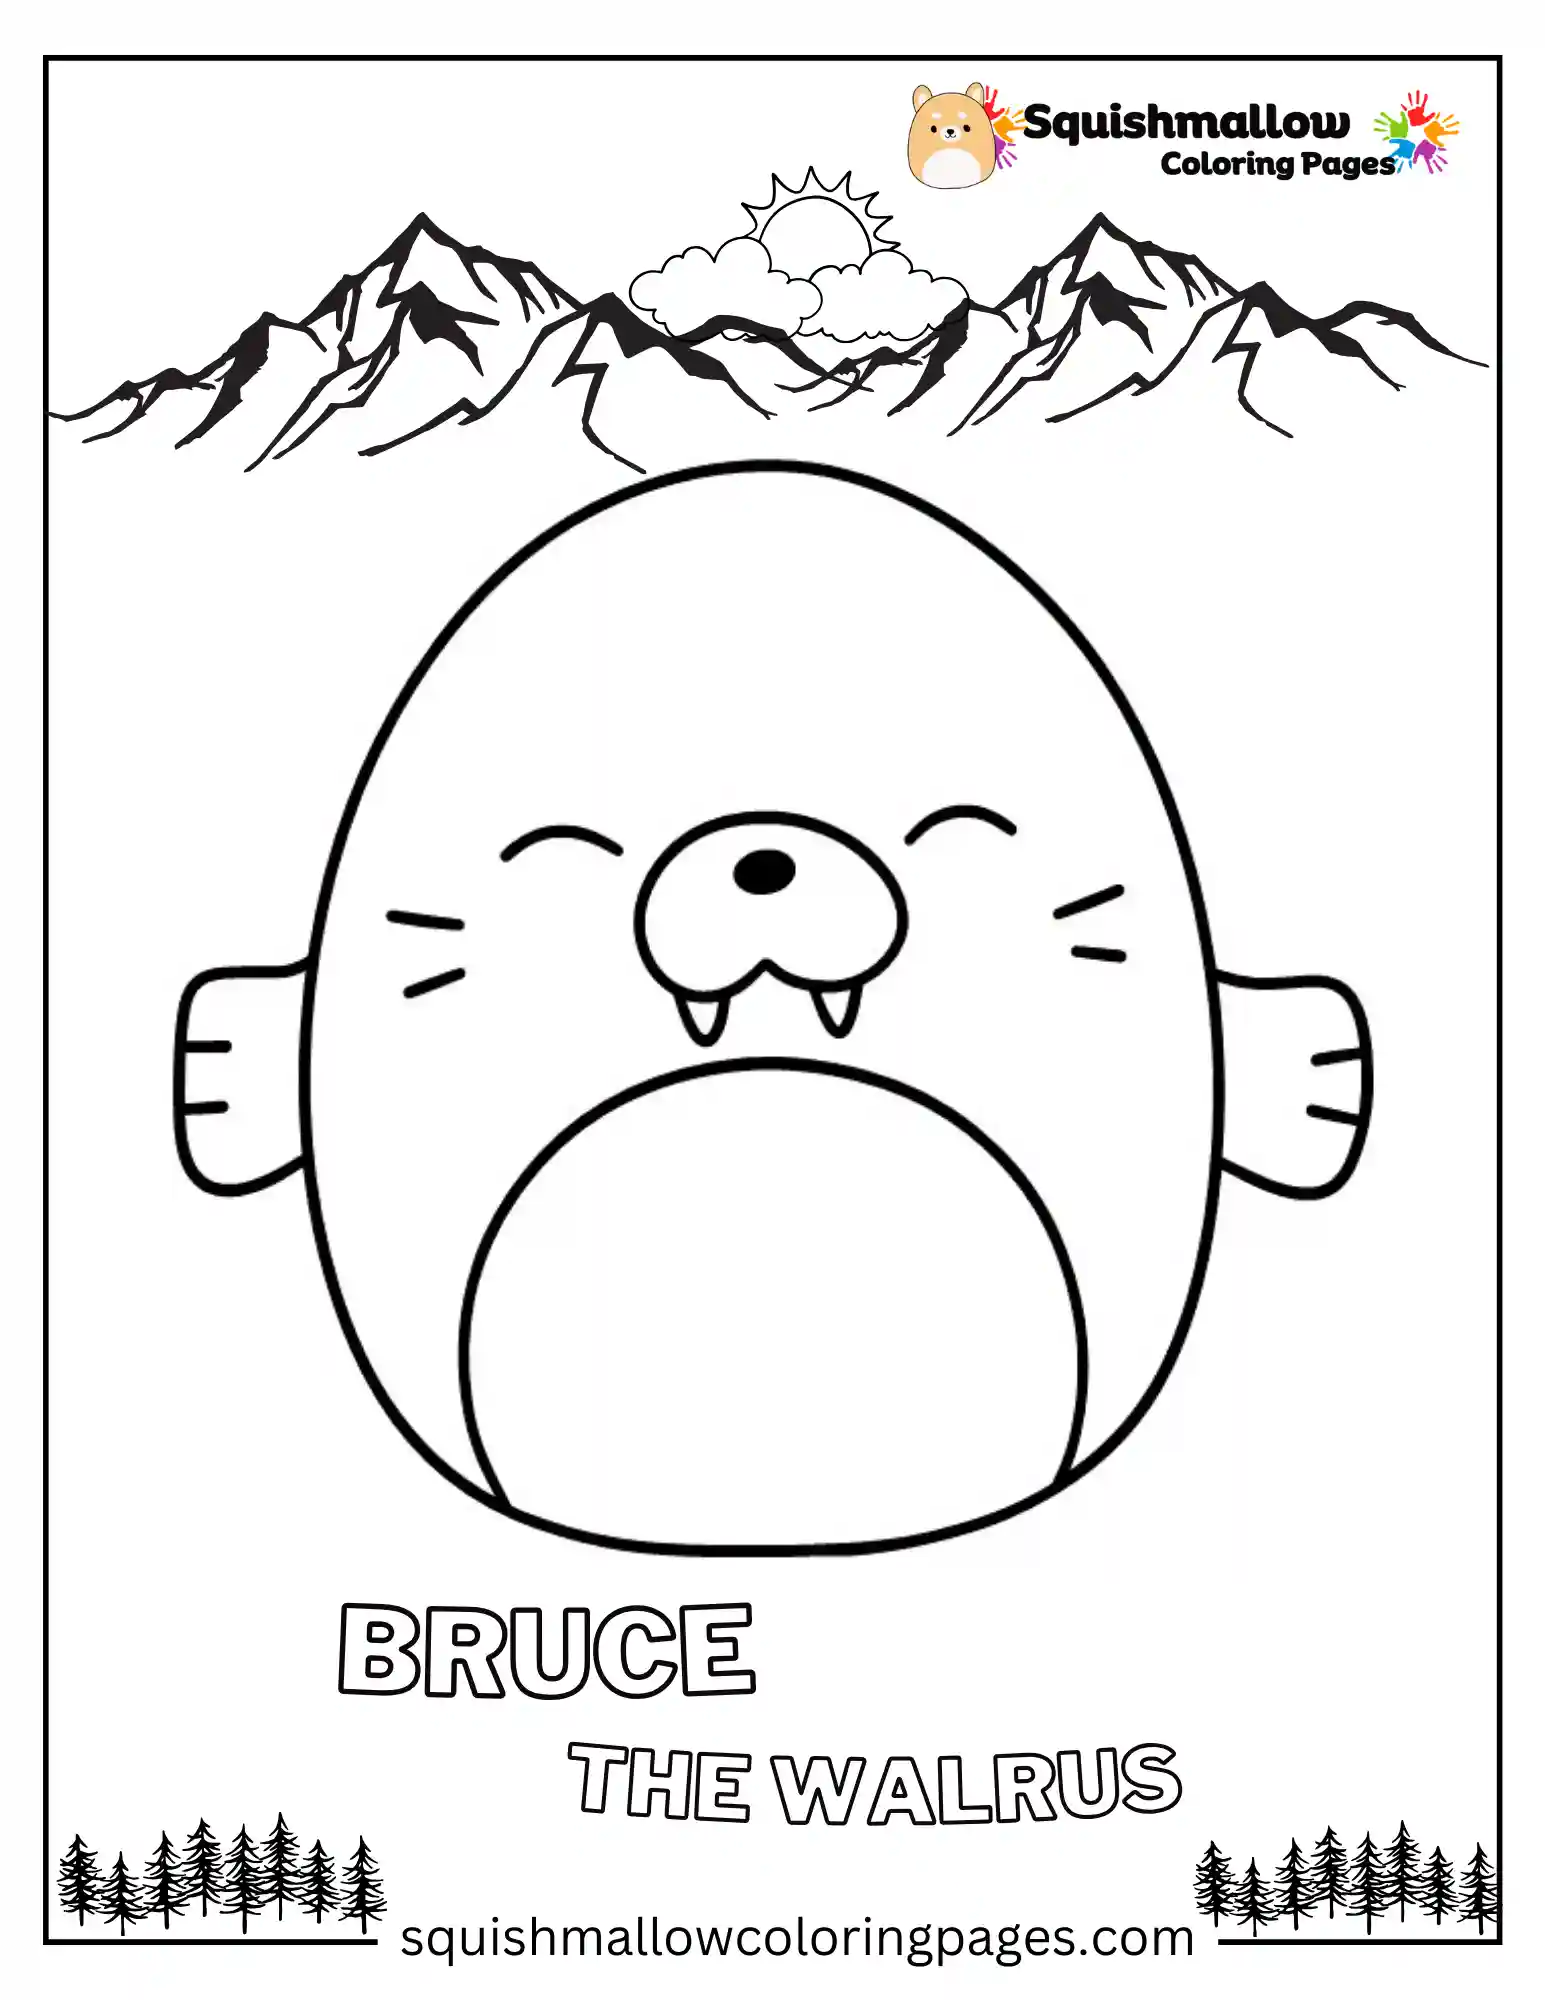 Bruce The Walrus Squishmallow Coloring Pages